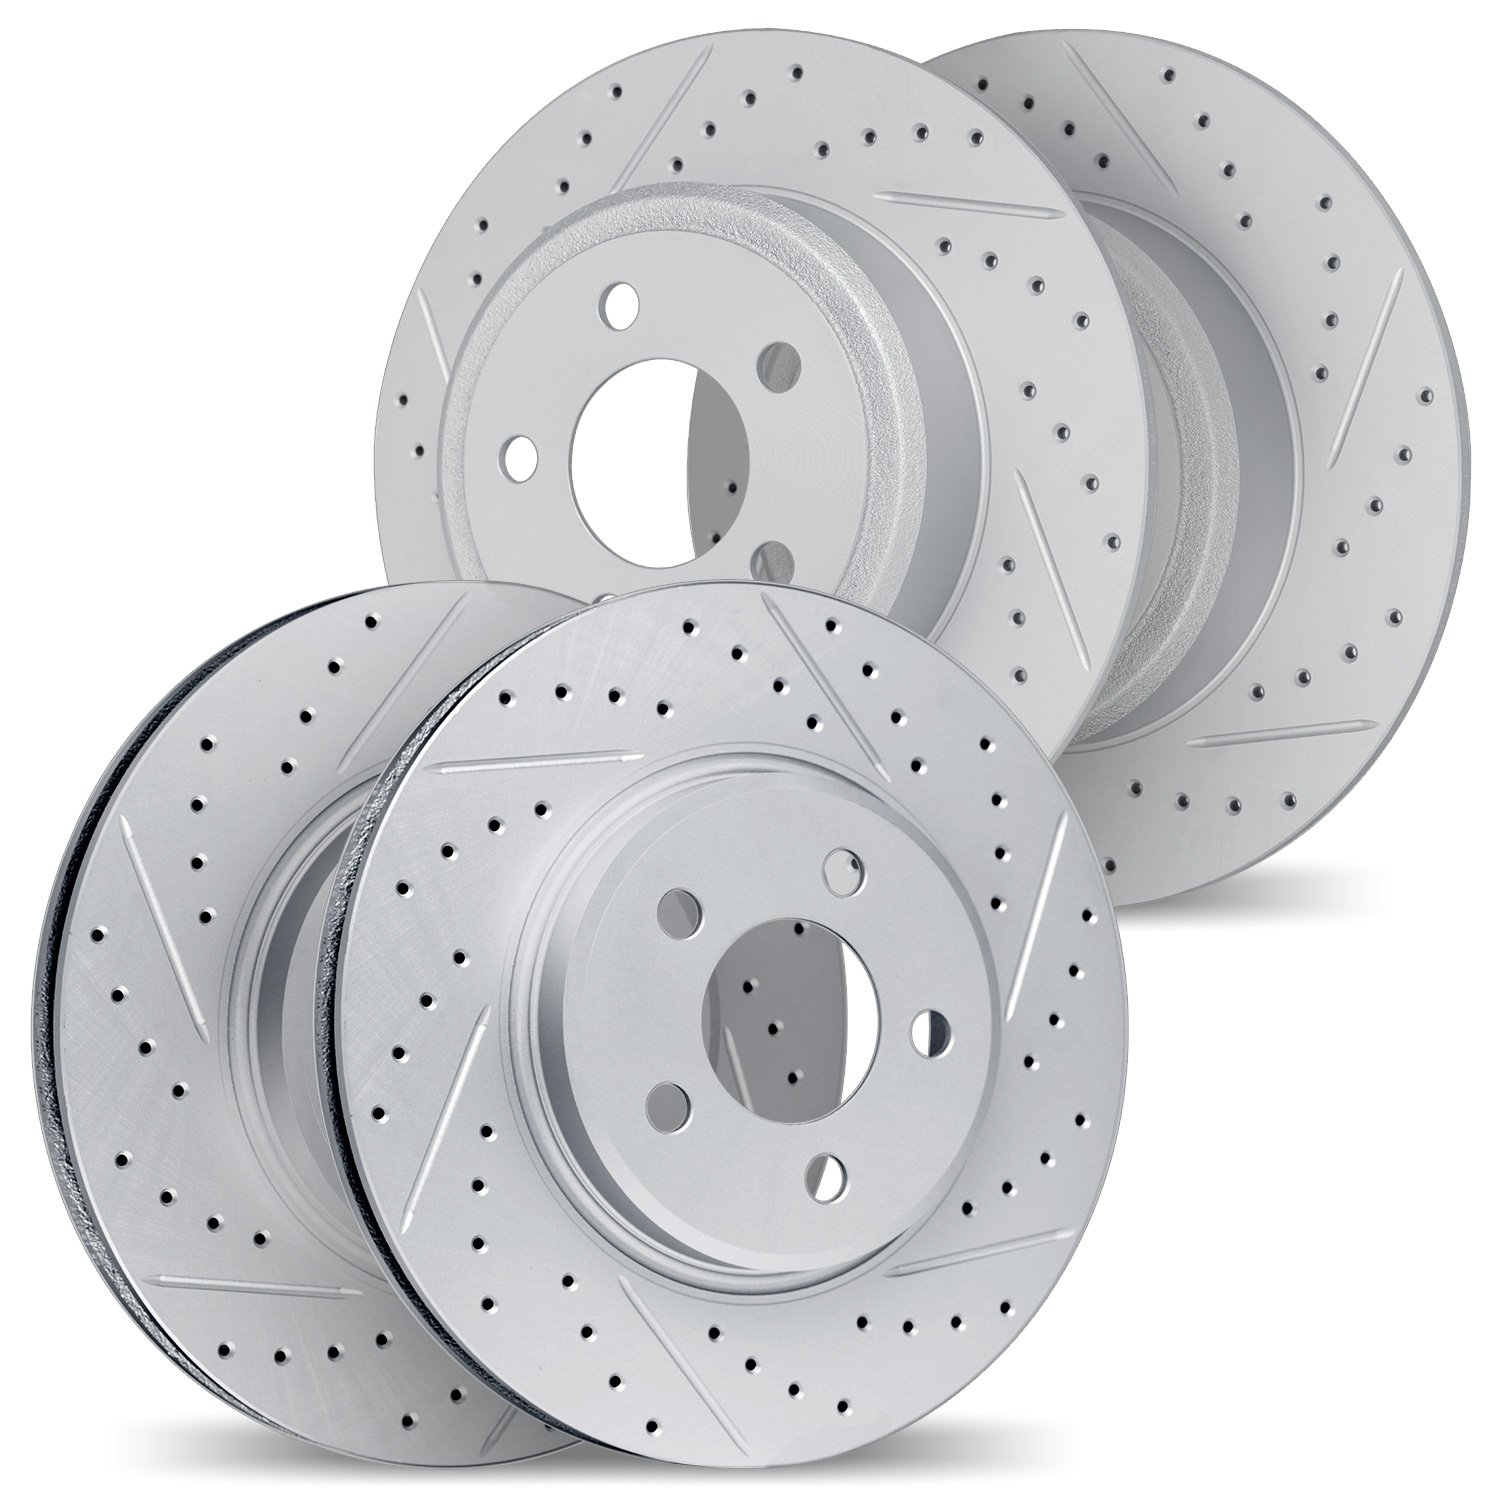 2004-67008 Geoperformance Drilled/Slotted Brake Rotors, 1999-2001 Infiniti/Nissan, Position: Front and Rear